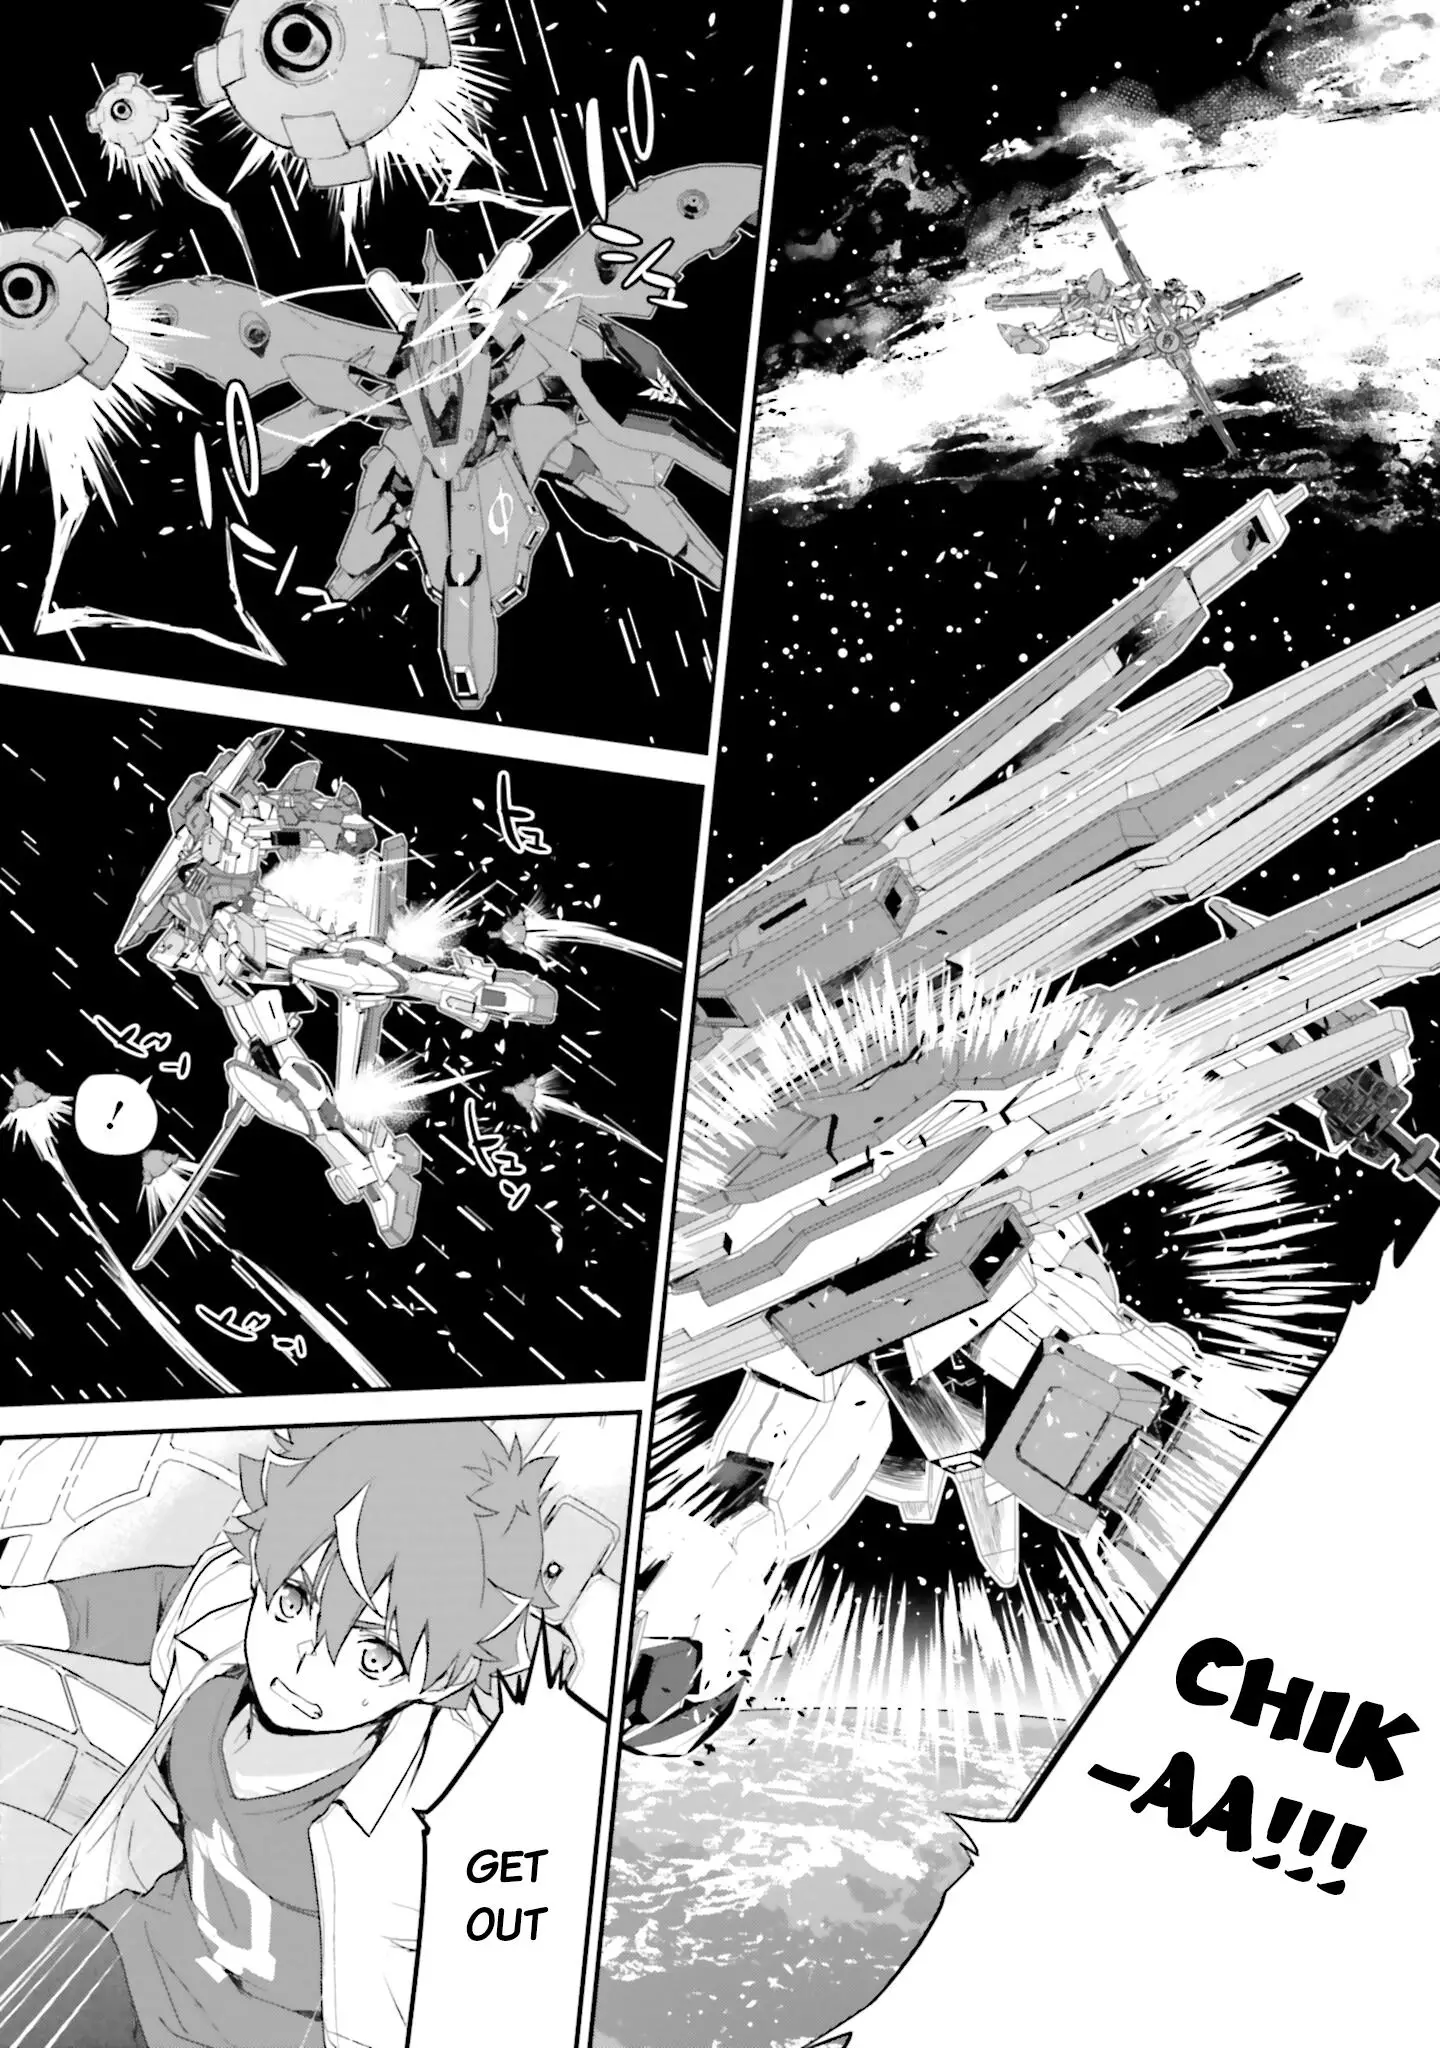 Mobile Suit Gundam N-Extreme - 5 page 3-4675c303